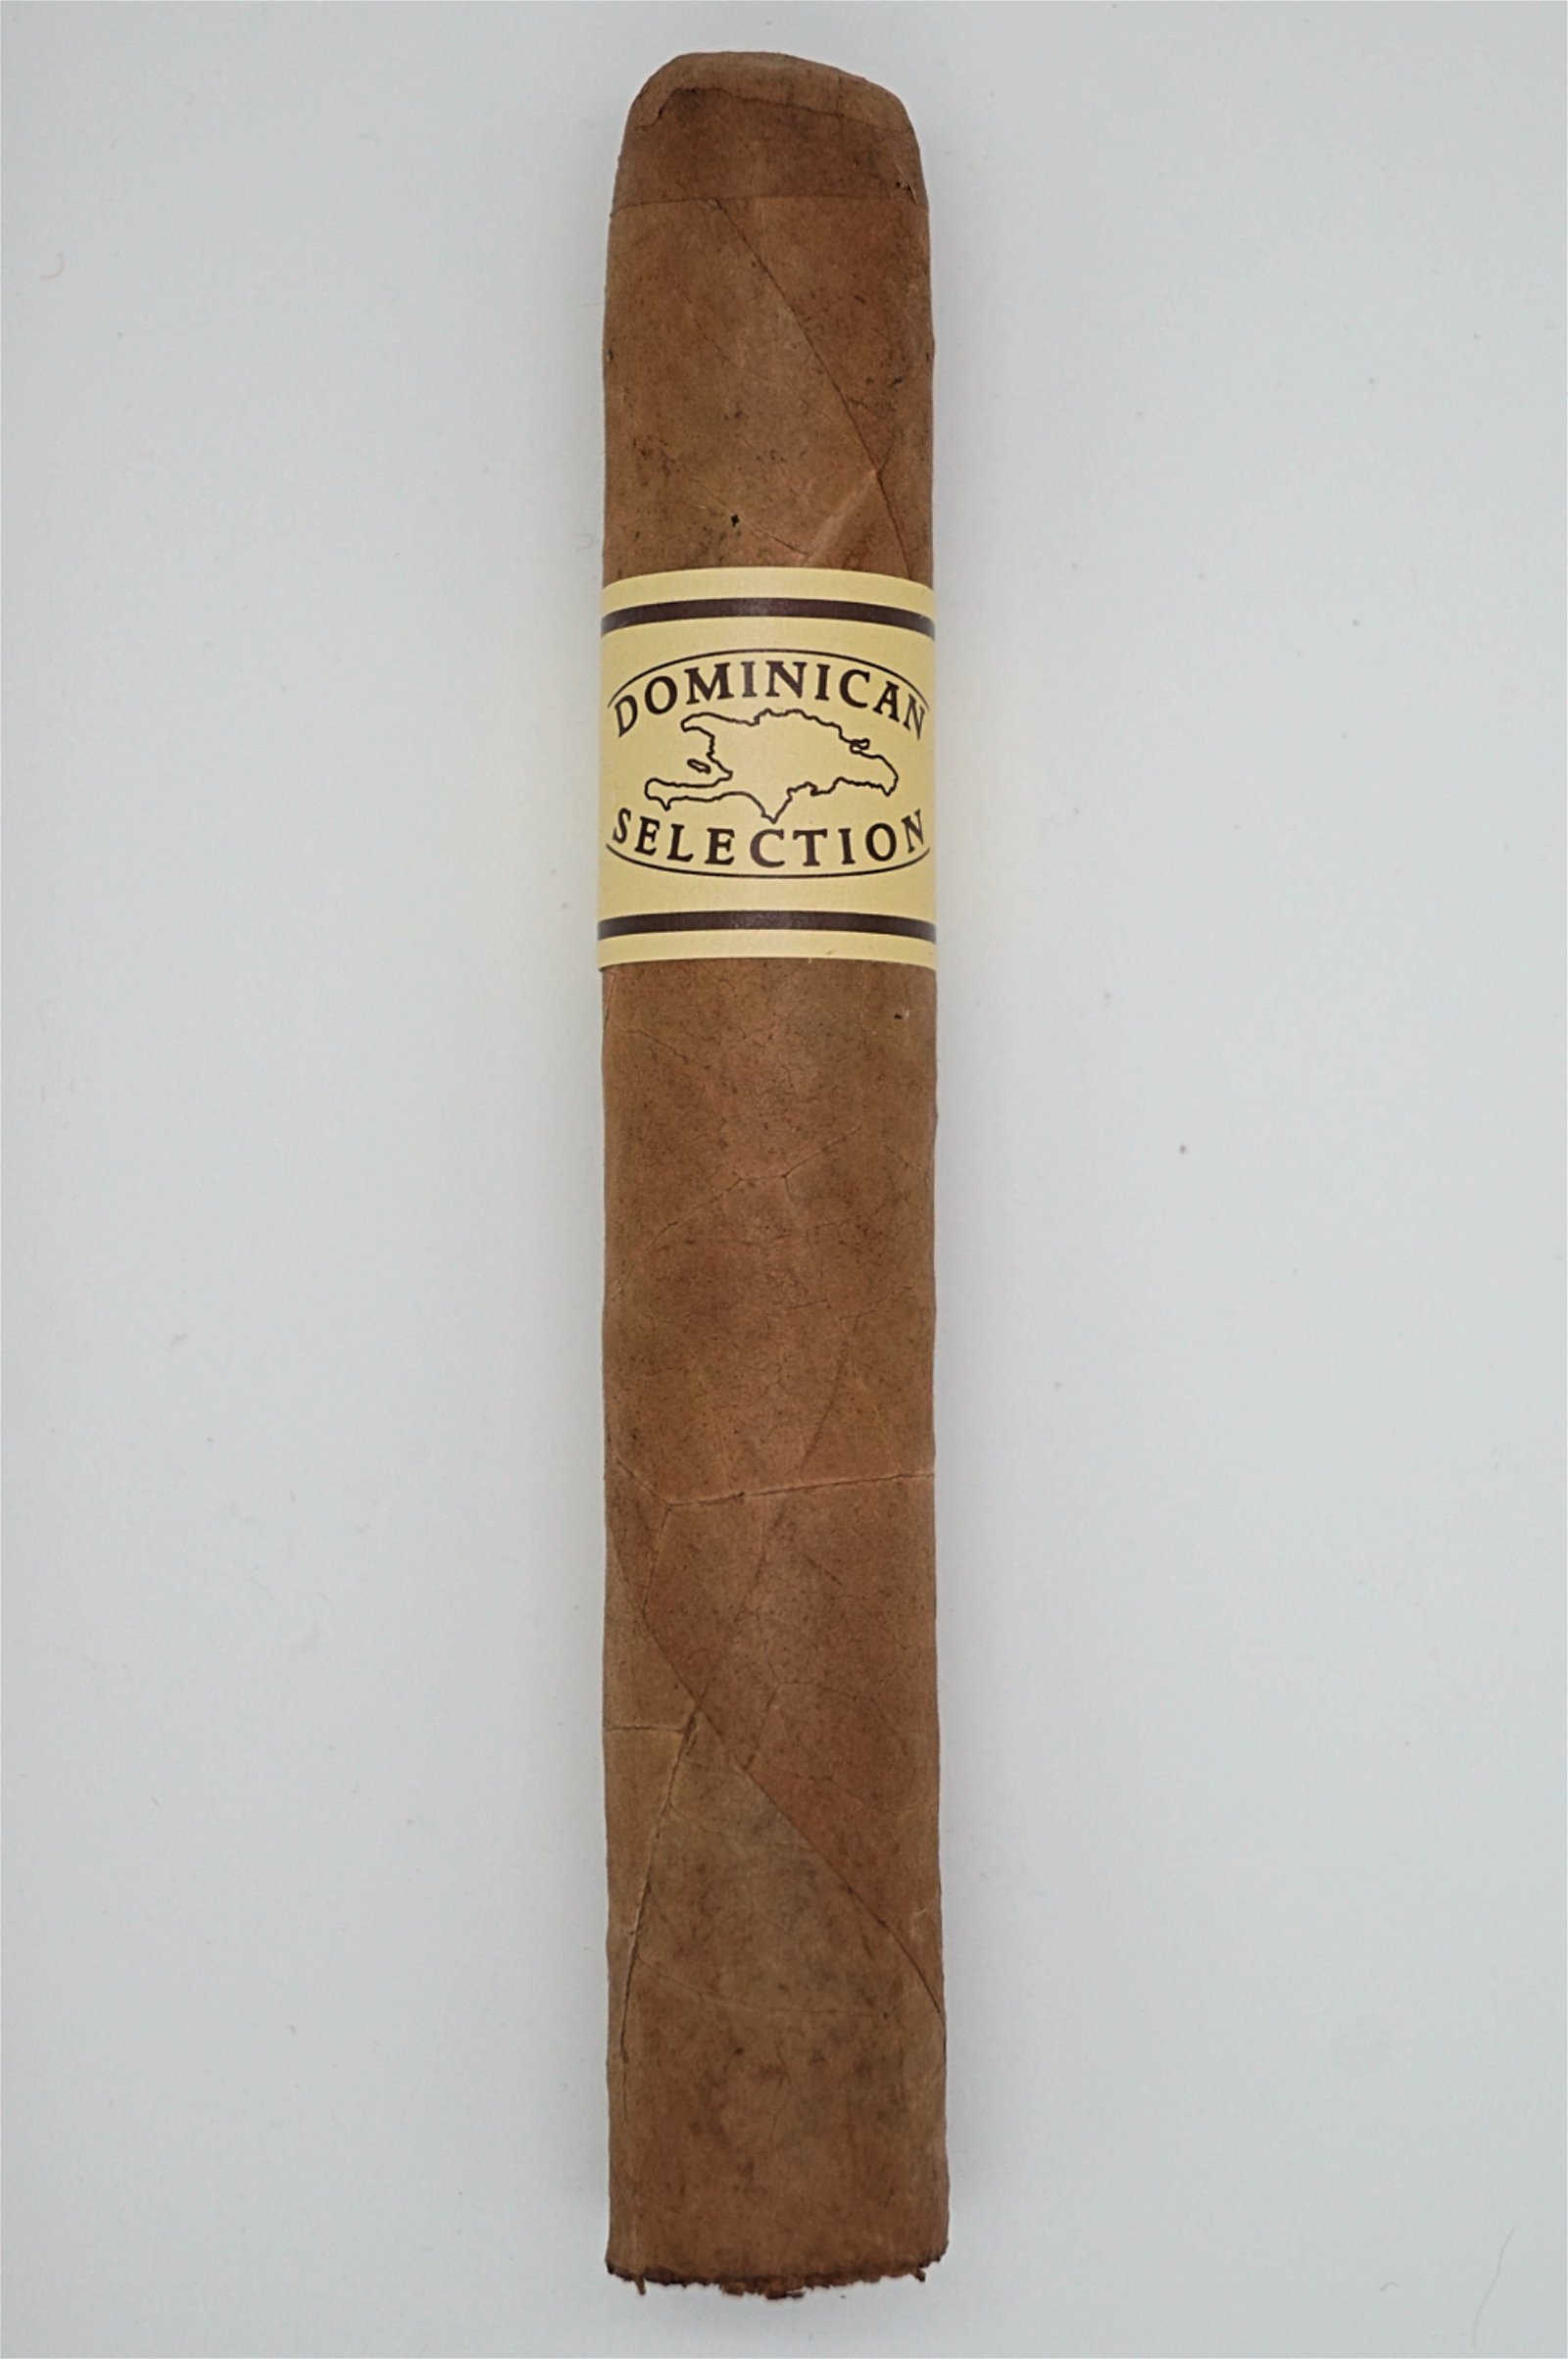 Dominican Selection Robusto